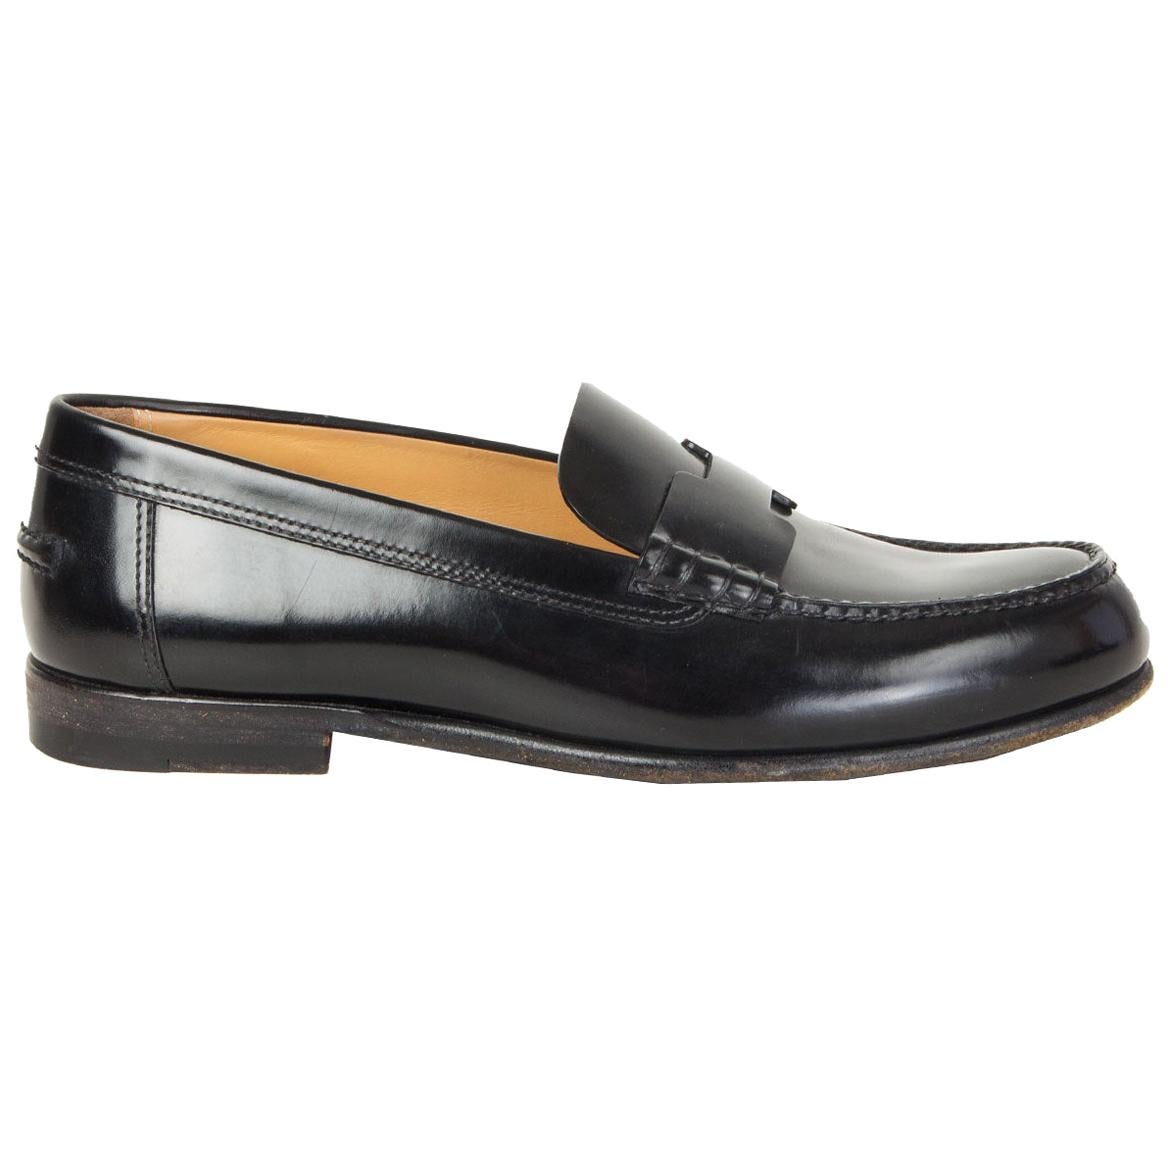 HERMES black leather KENNEDY Loafers Shoes 36.5